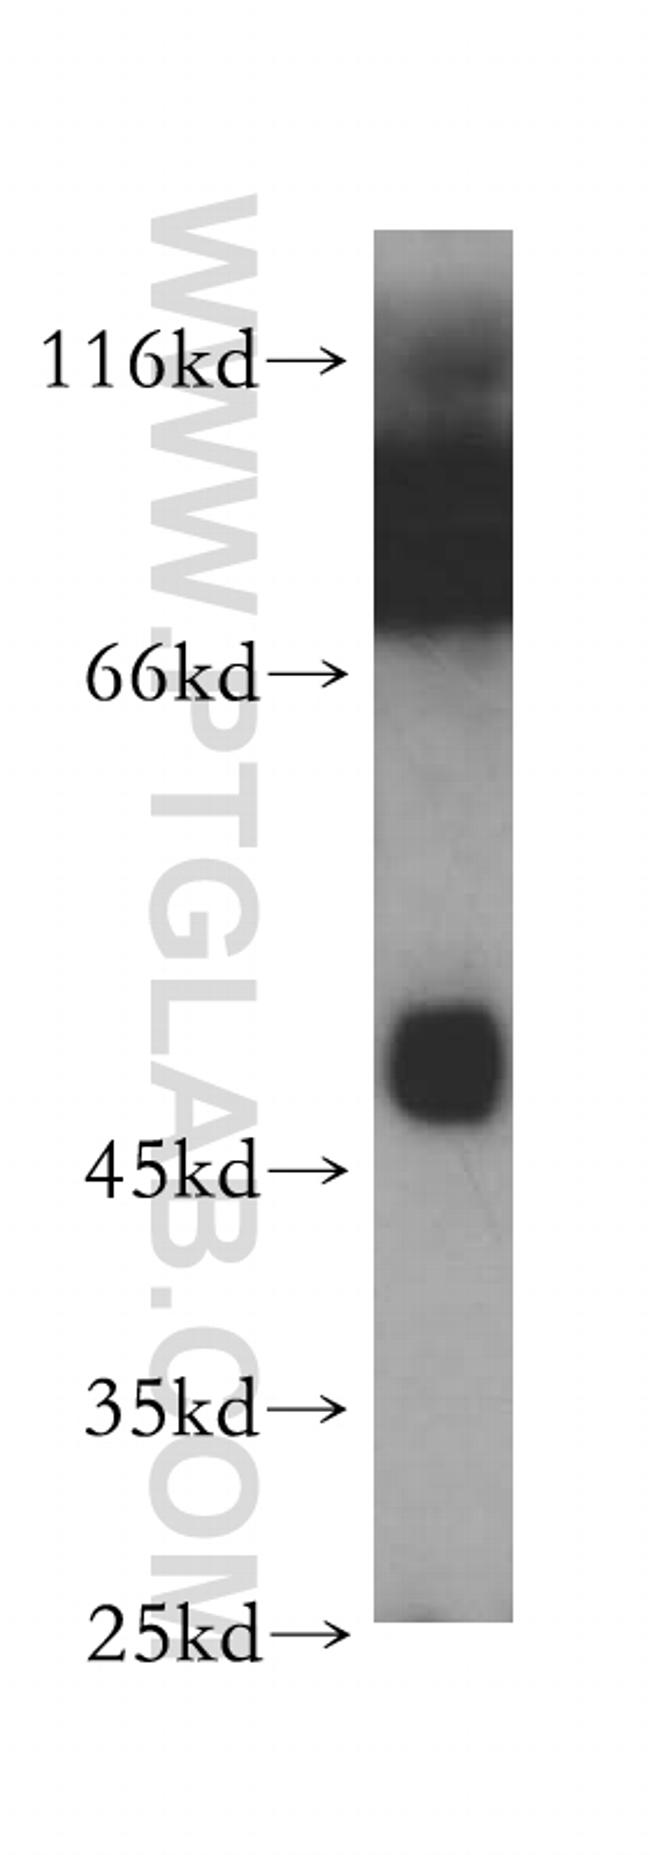 Carboxypeptidase A3 Antibody in Western Blot (WB)